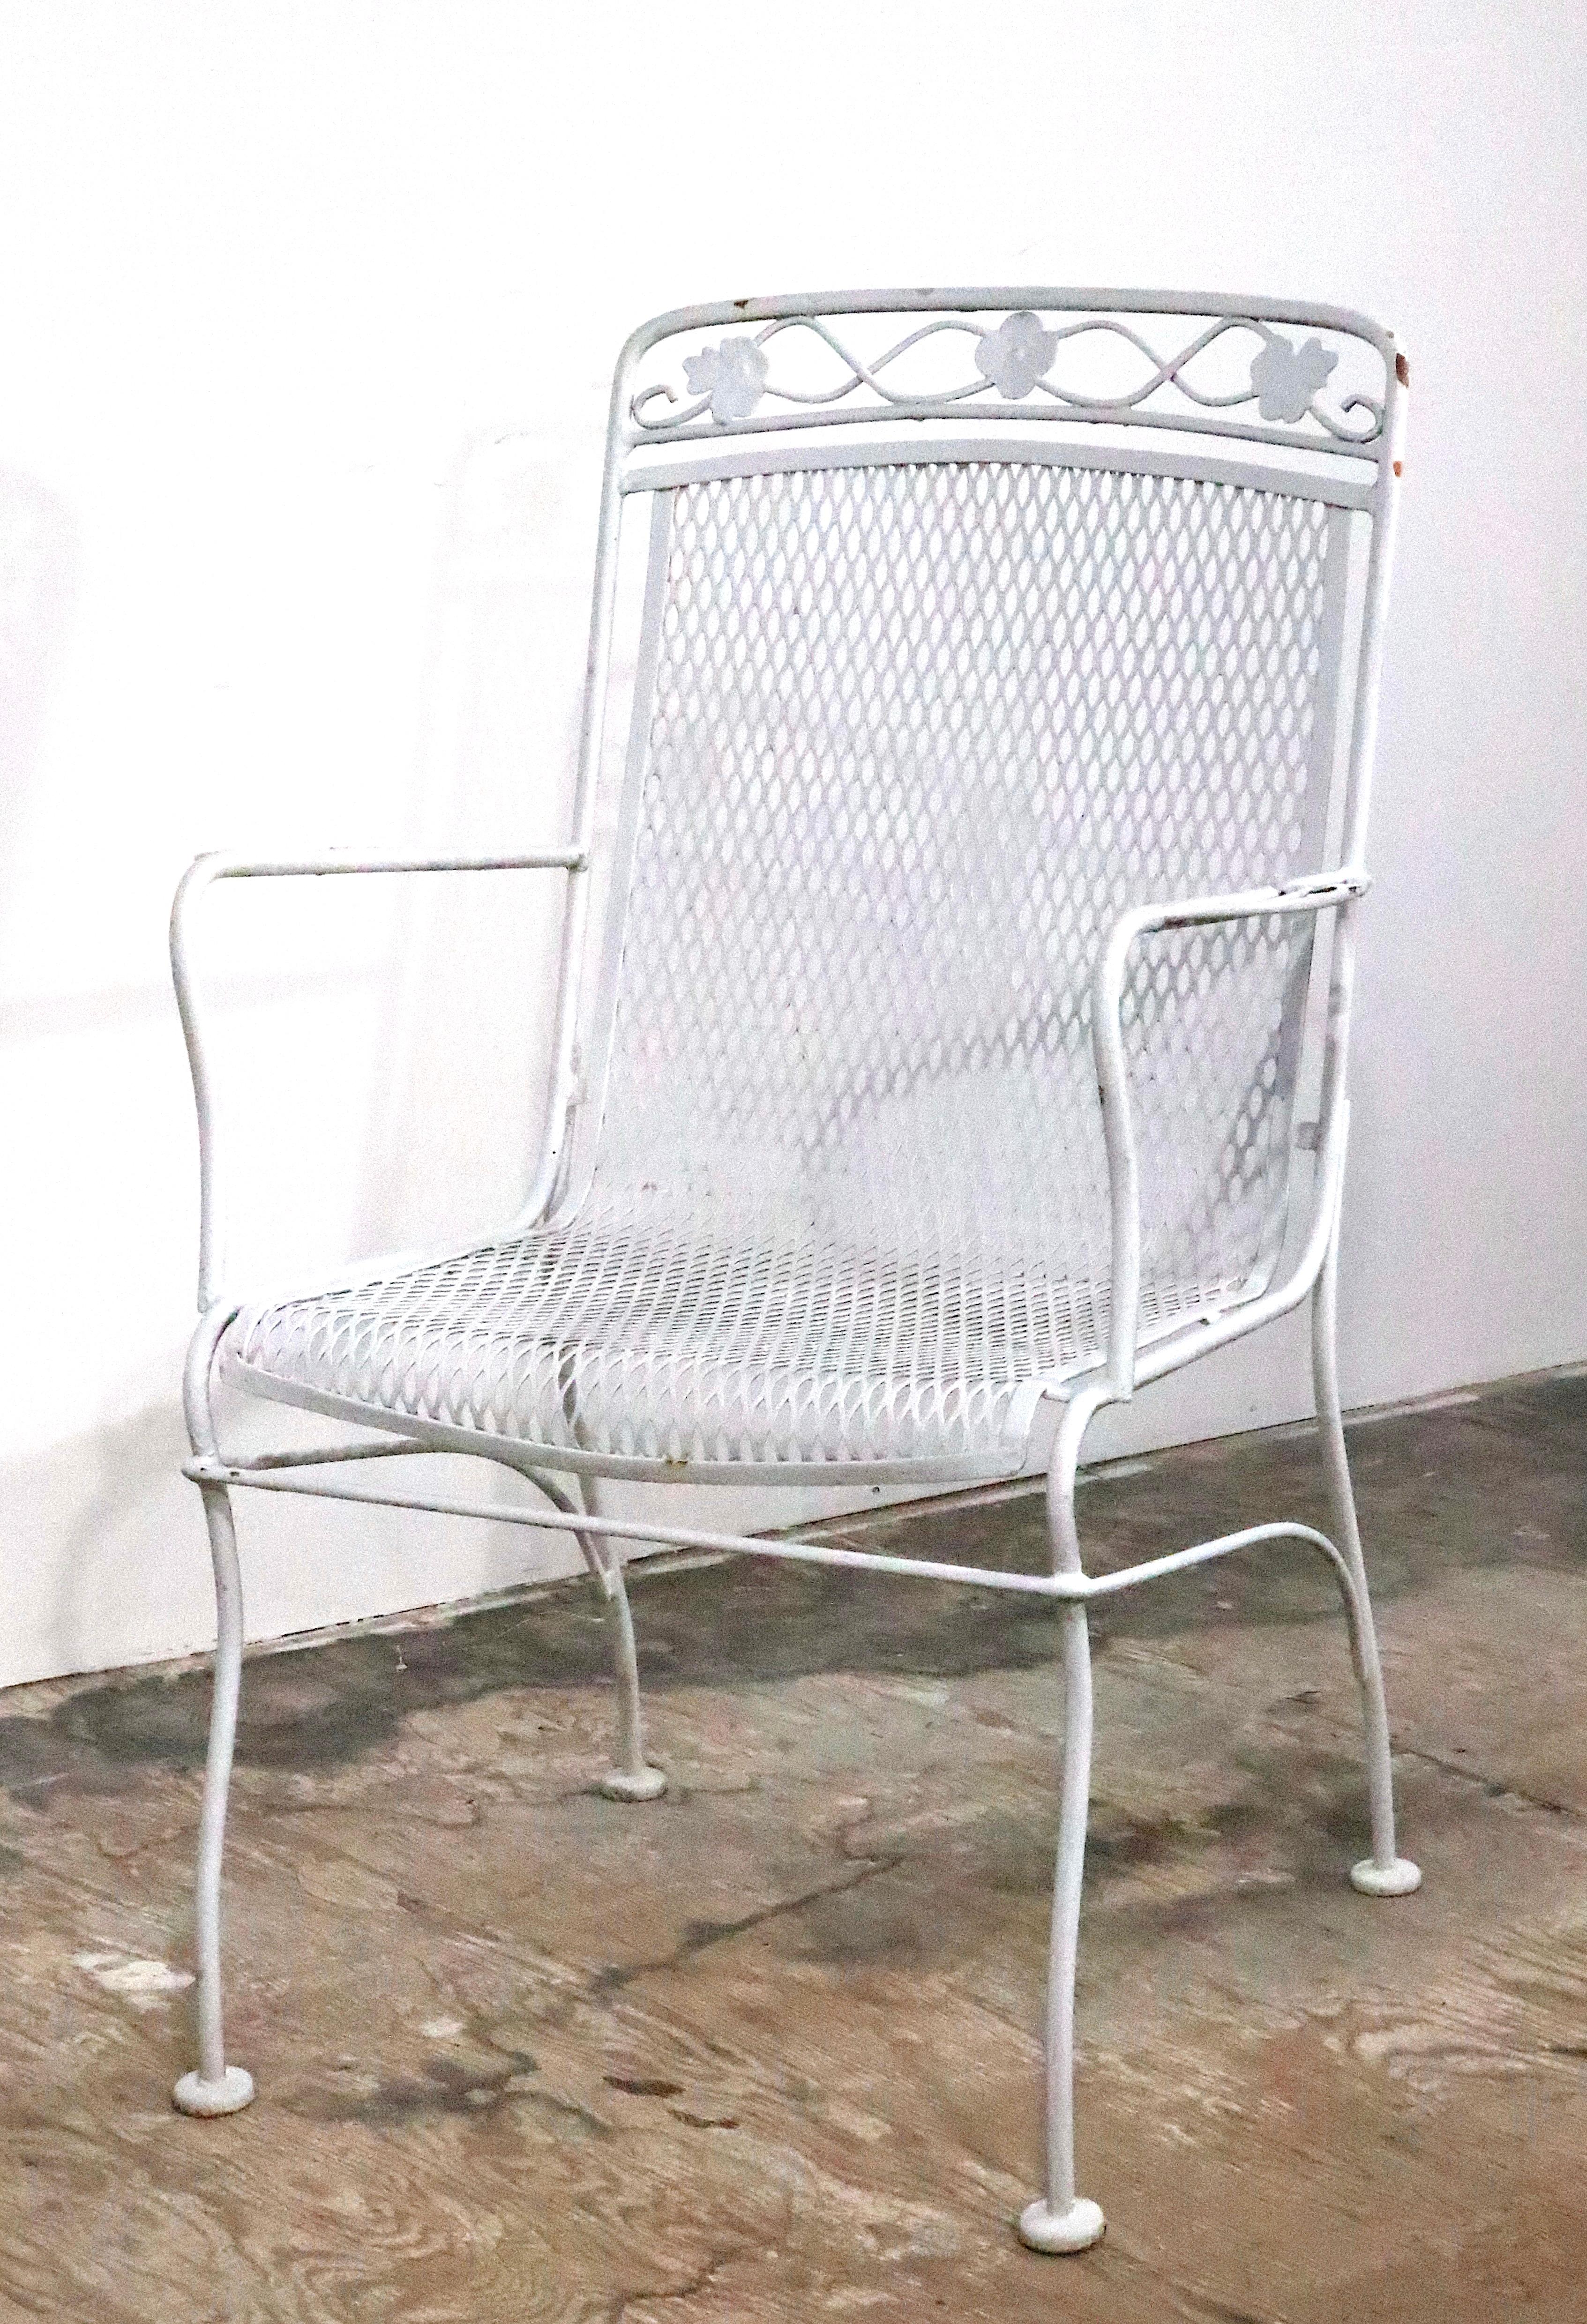 American Pr. Wrought Iron Metal Mesh Garden Patio Poolside Chairs by Woodard c. 1950/70's For Sale